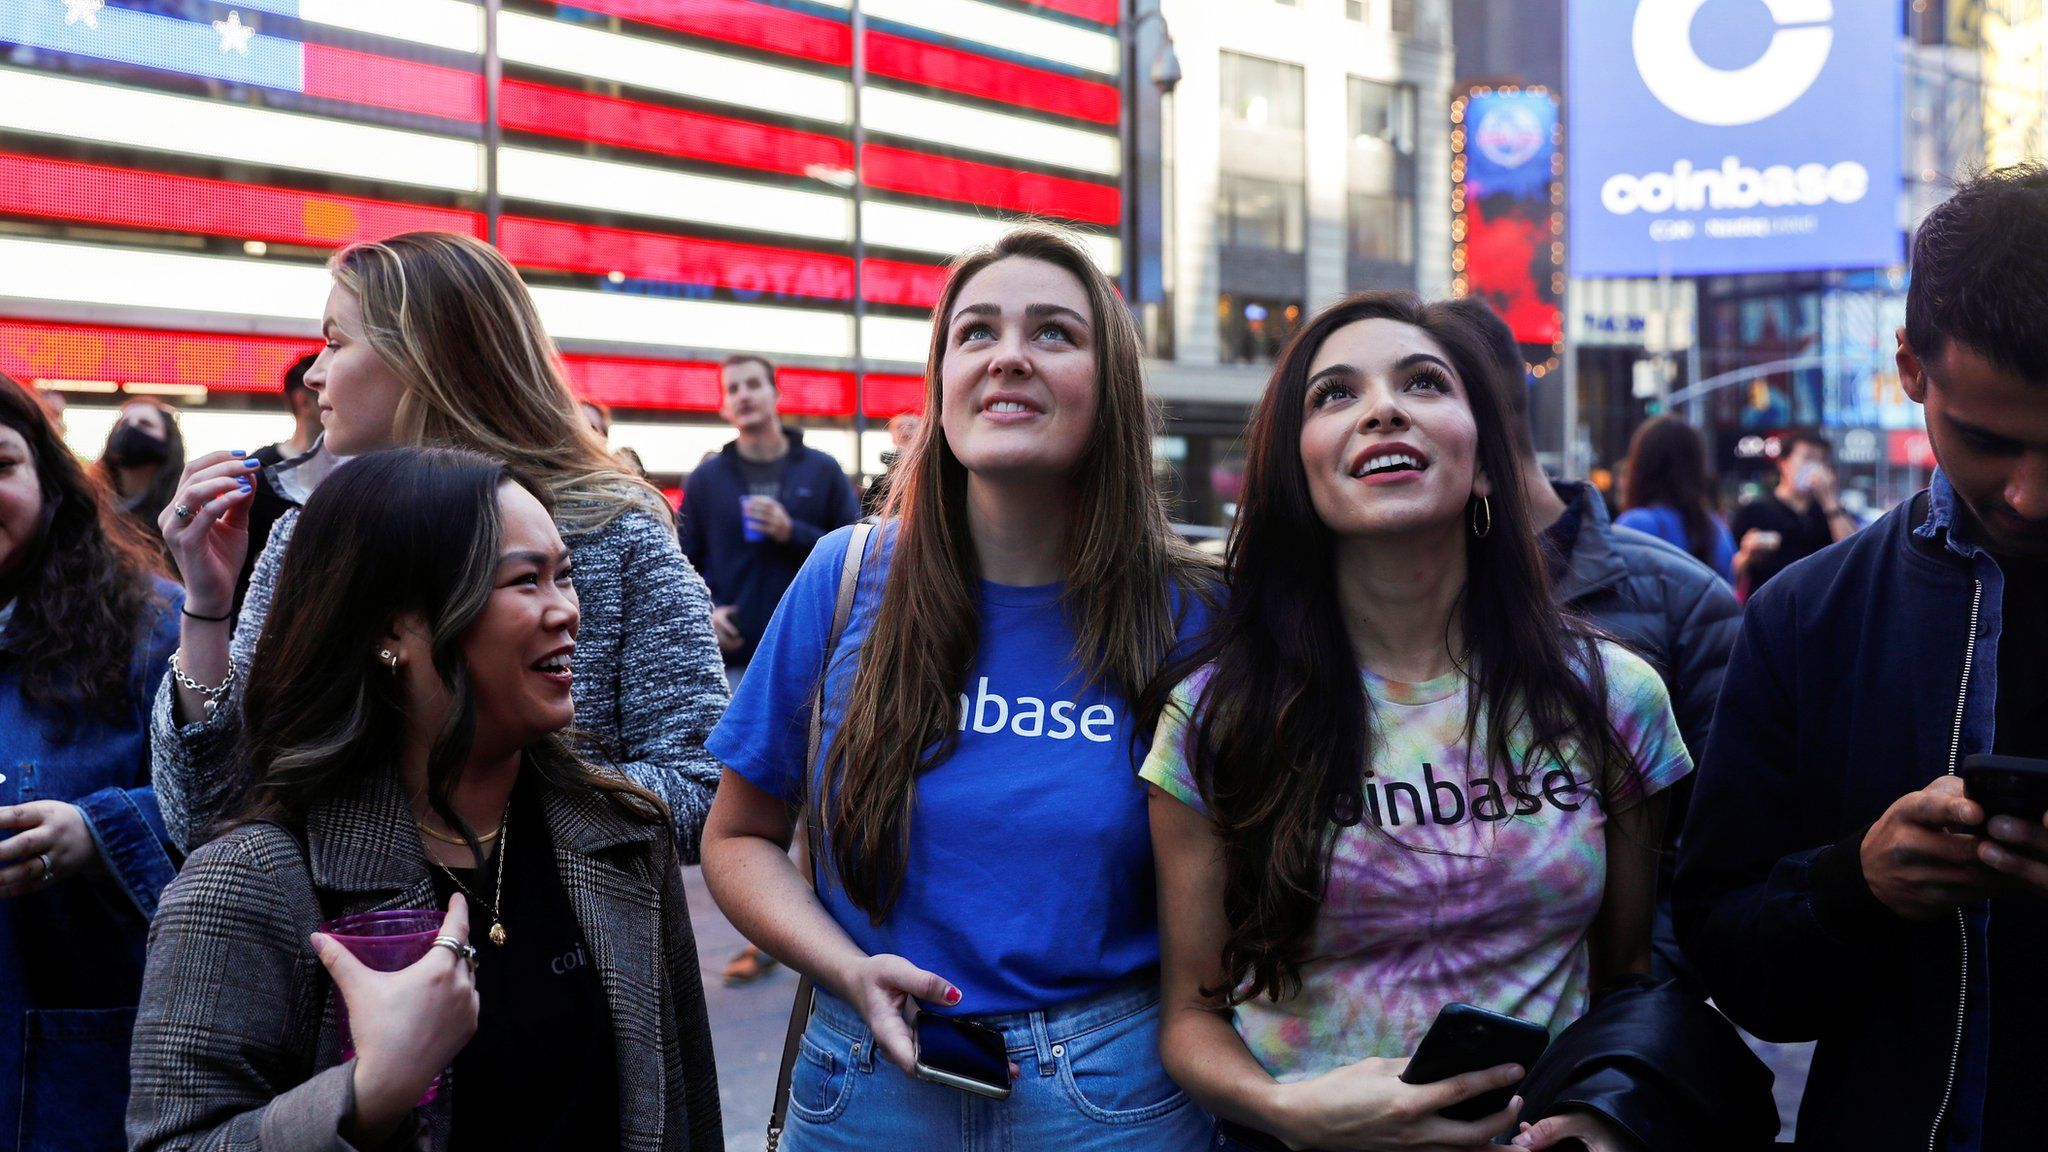 Employees of Coinbase Global Inc, the biggest U.S. cryptocurrency exchange, watch as their listing is displayed on the Nasdaq MarketSite jumbotron at Times Square in New York, U.S., April 14, 2021